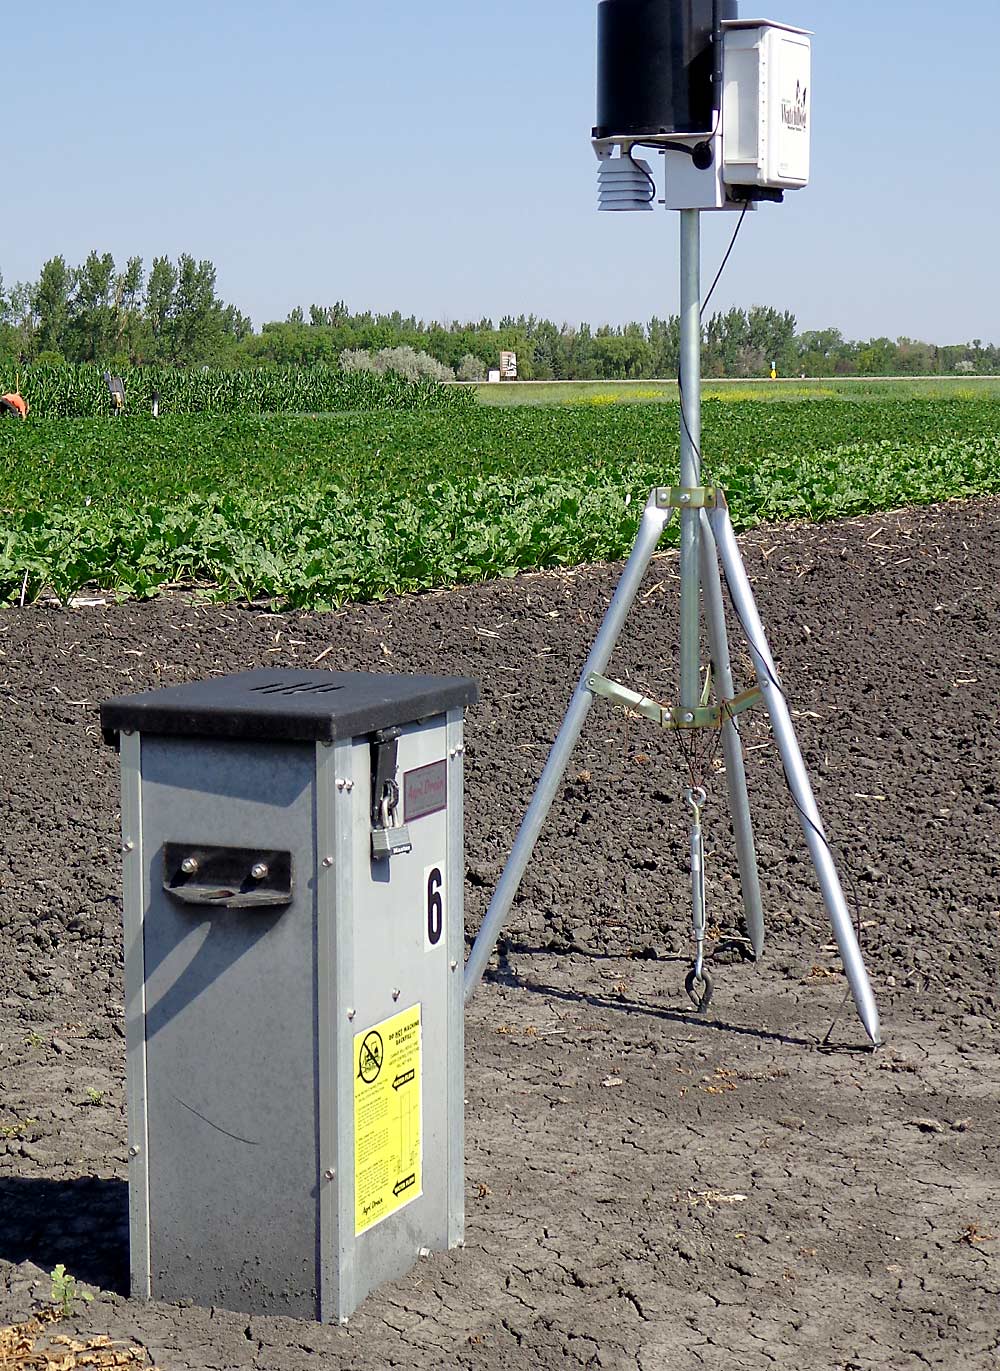 Extension agronomist Hans Kandel of North Dakota State University recommends control boxes, shown here in the foreground, as good additions to a drainage system. By adjusting the interior baffles, the grower can “drain when you need to, and hold some water when you don’t,” Kandel said. (Courtesy Hans Kandel/ North Dakota State University)